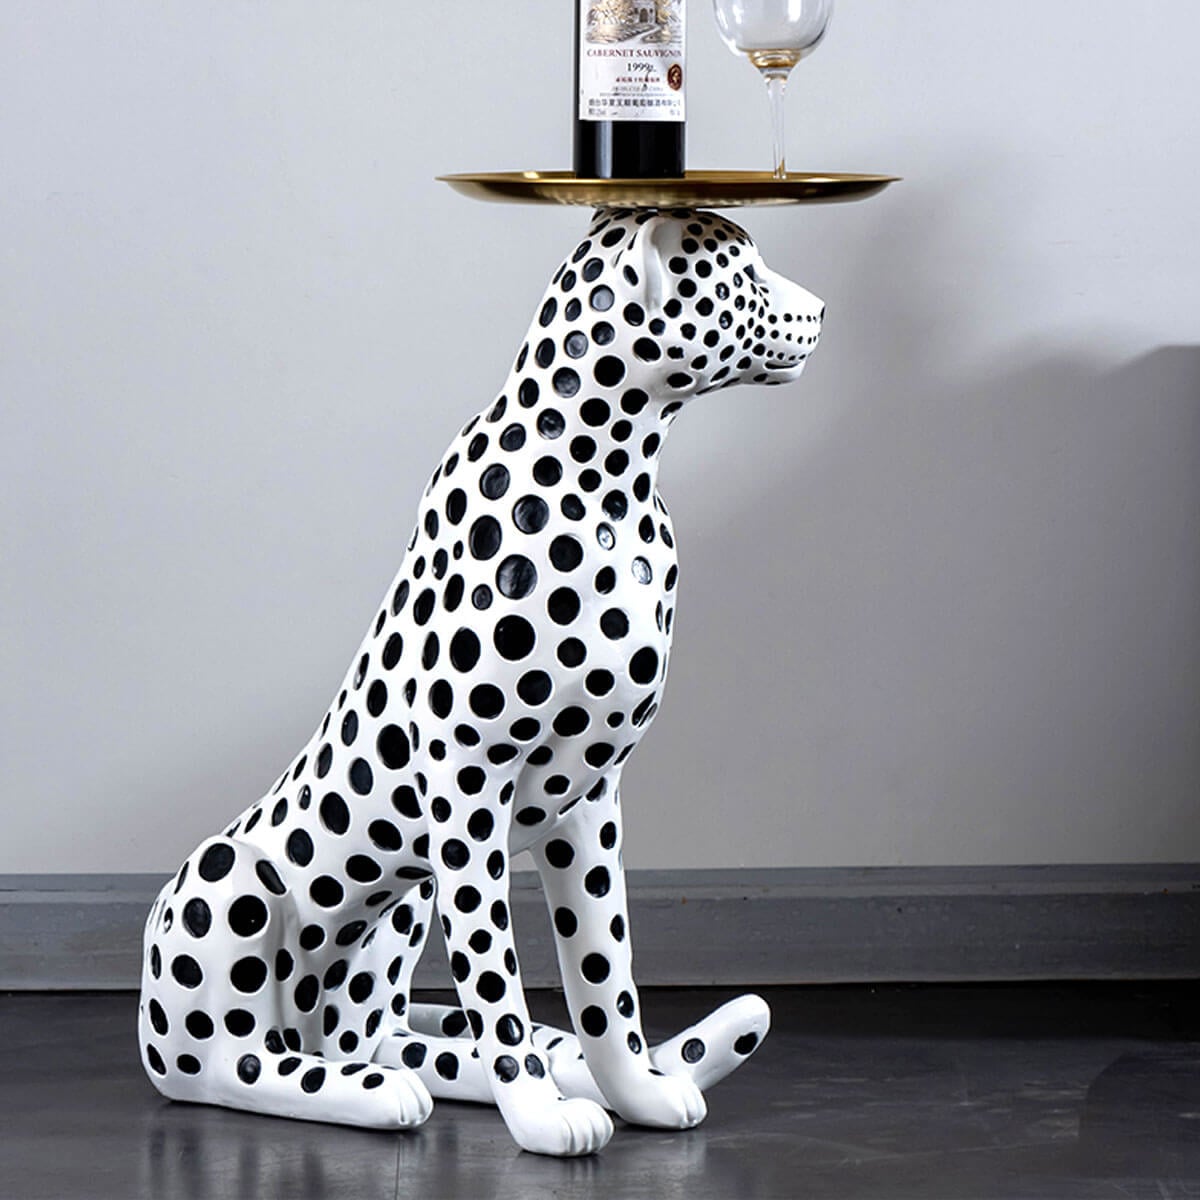 Wildlife-Inspired Home Decor - Leopard Side Table with Distinctive Design